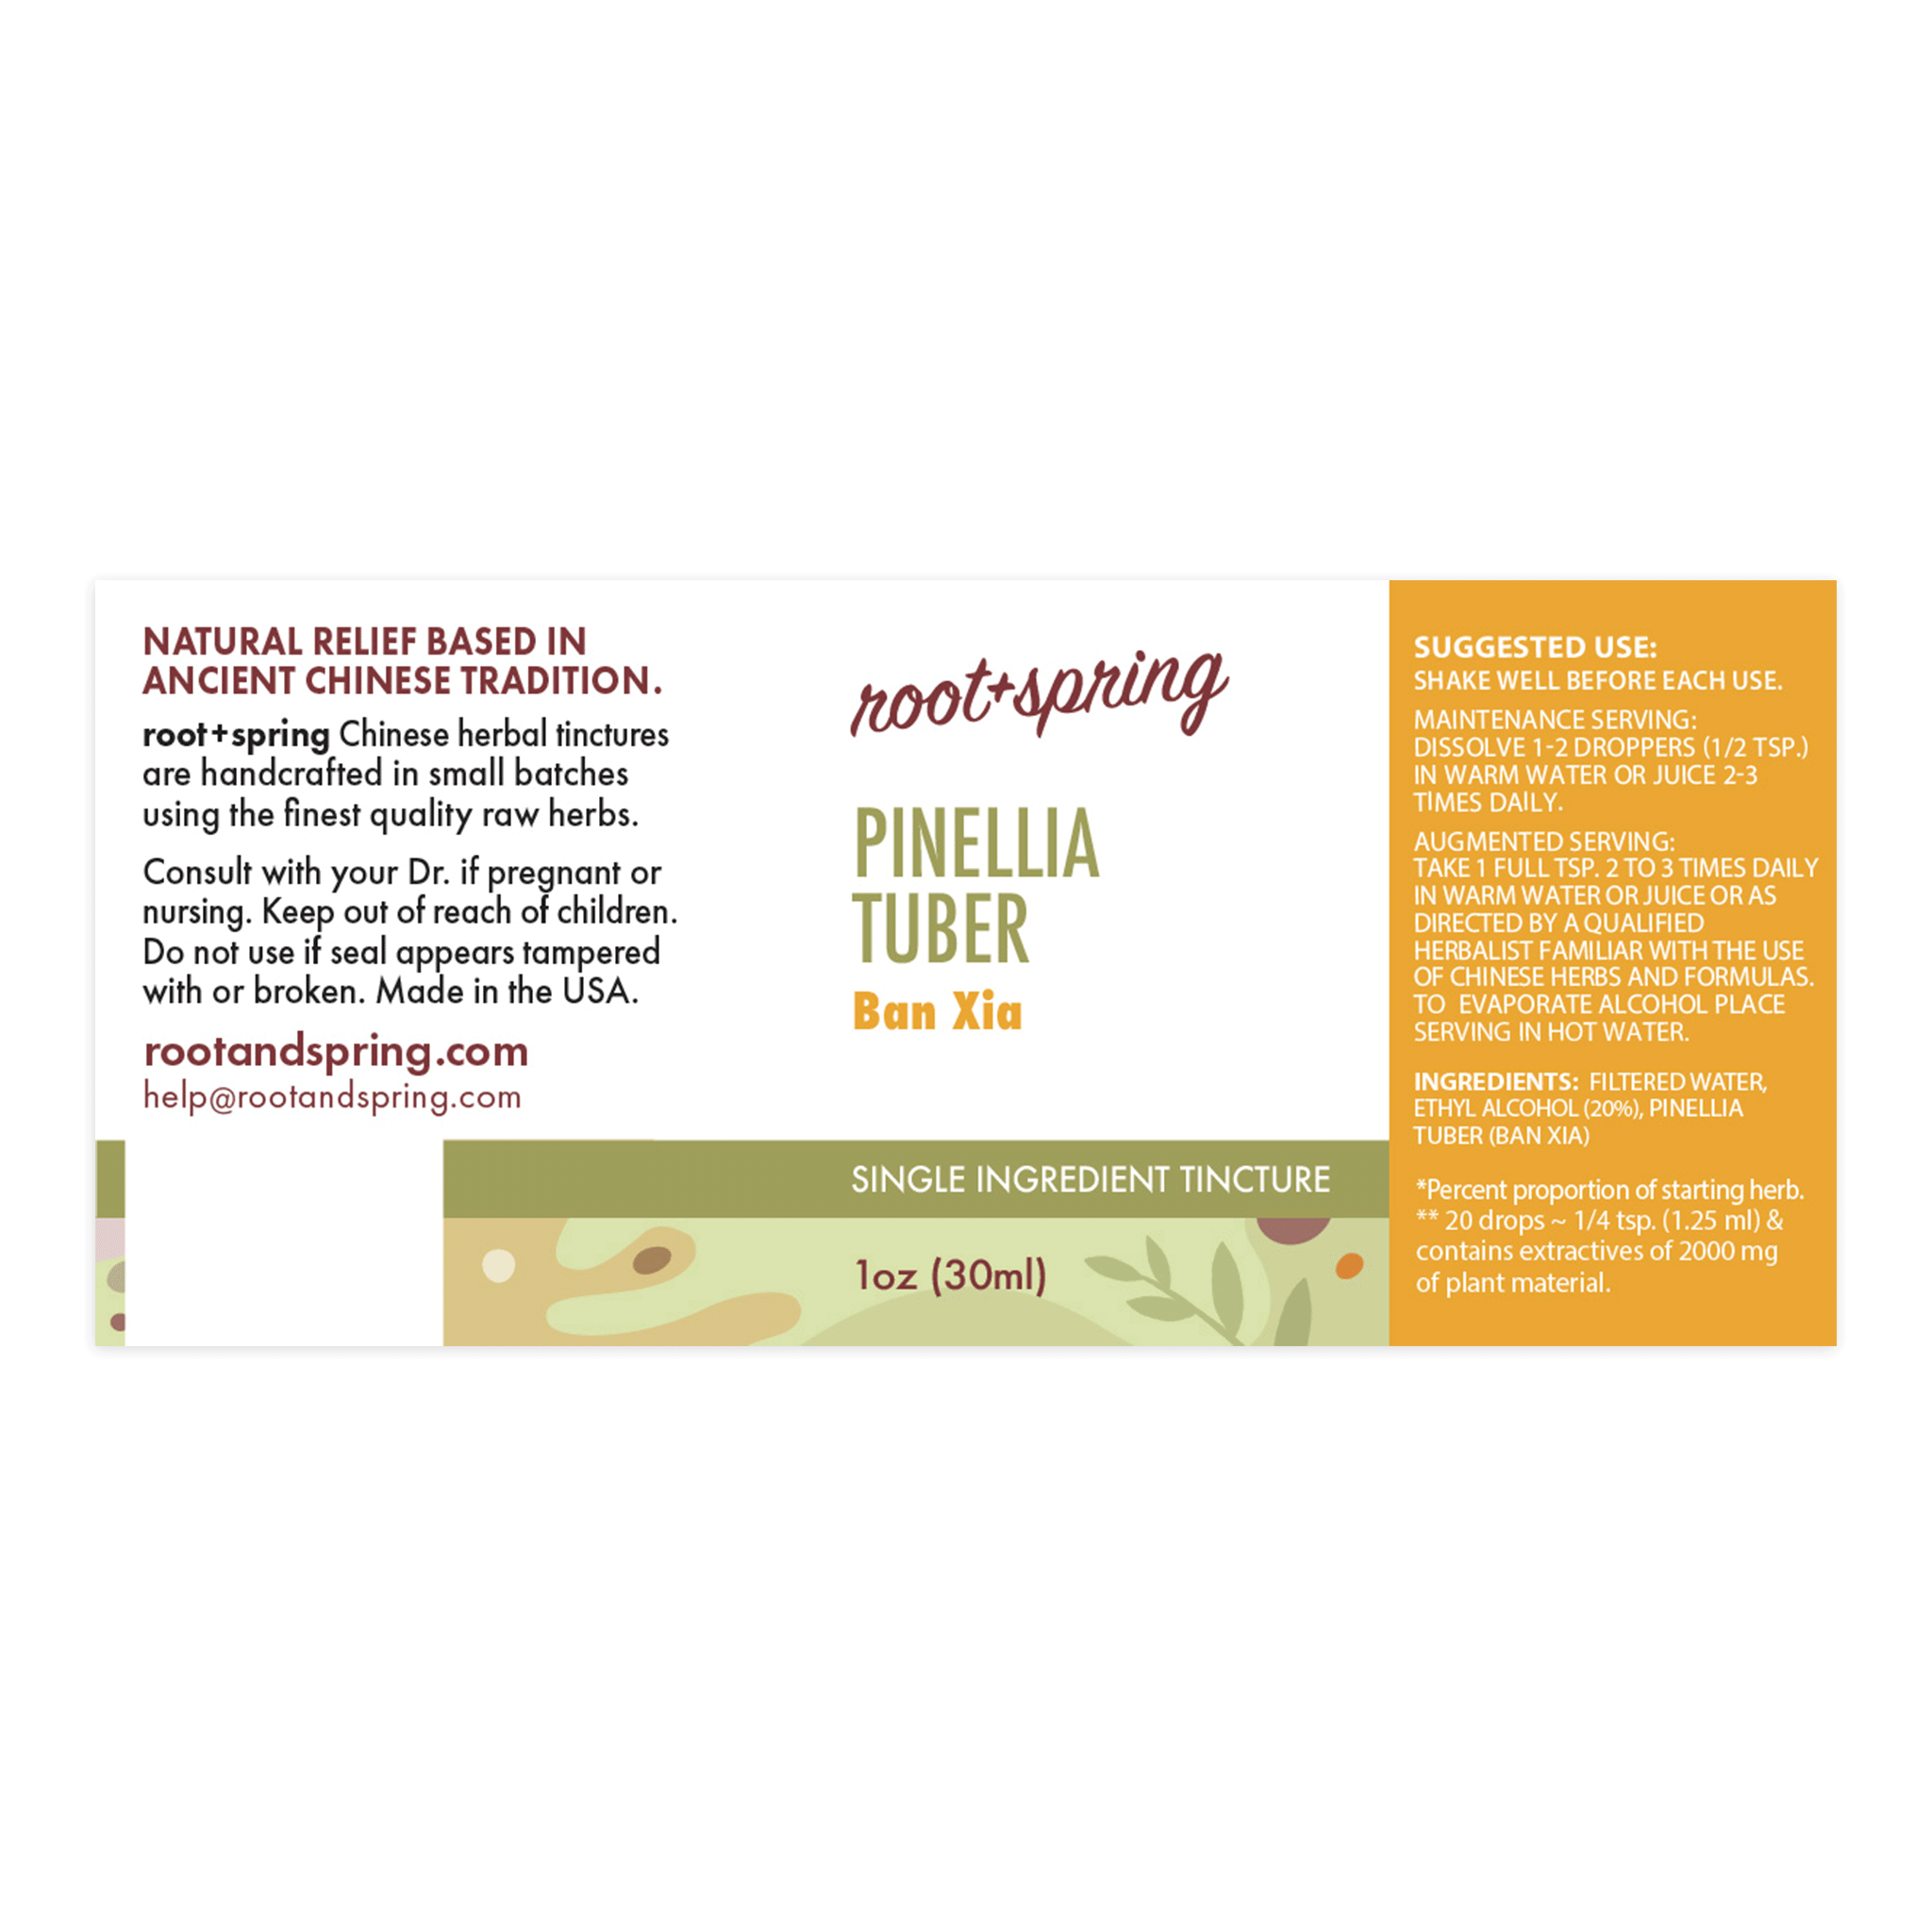 Label for PInellia Tuber, or Ban Xia, Herbal Tincture, by root + spring.